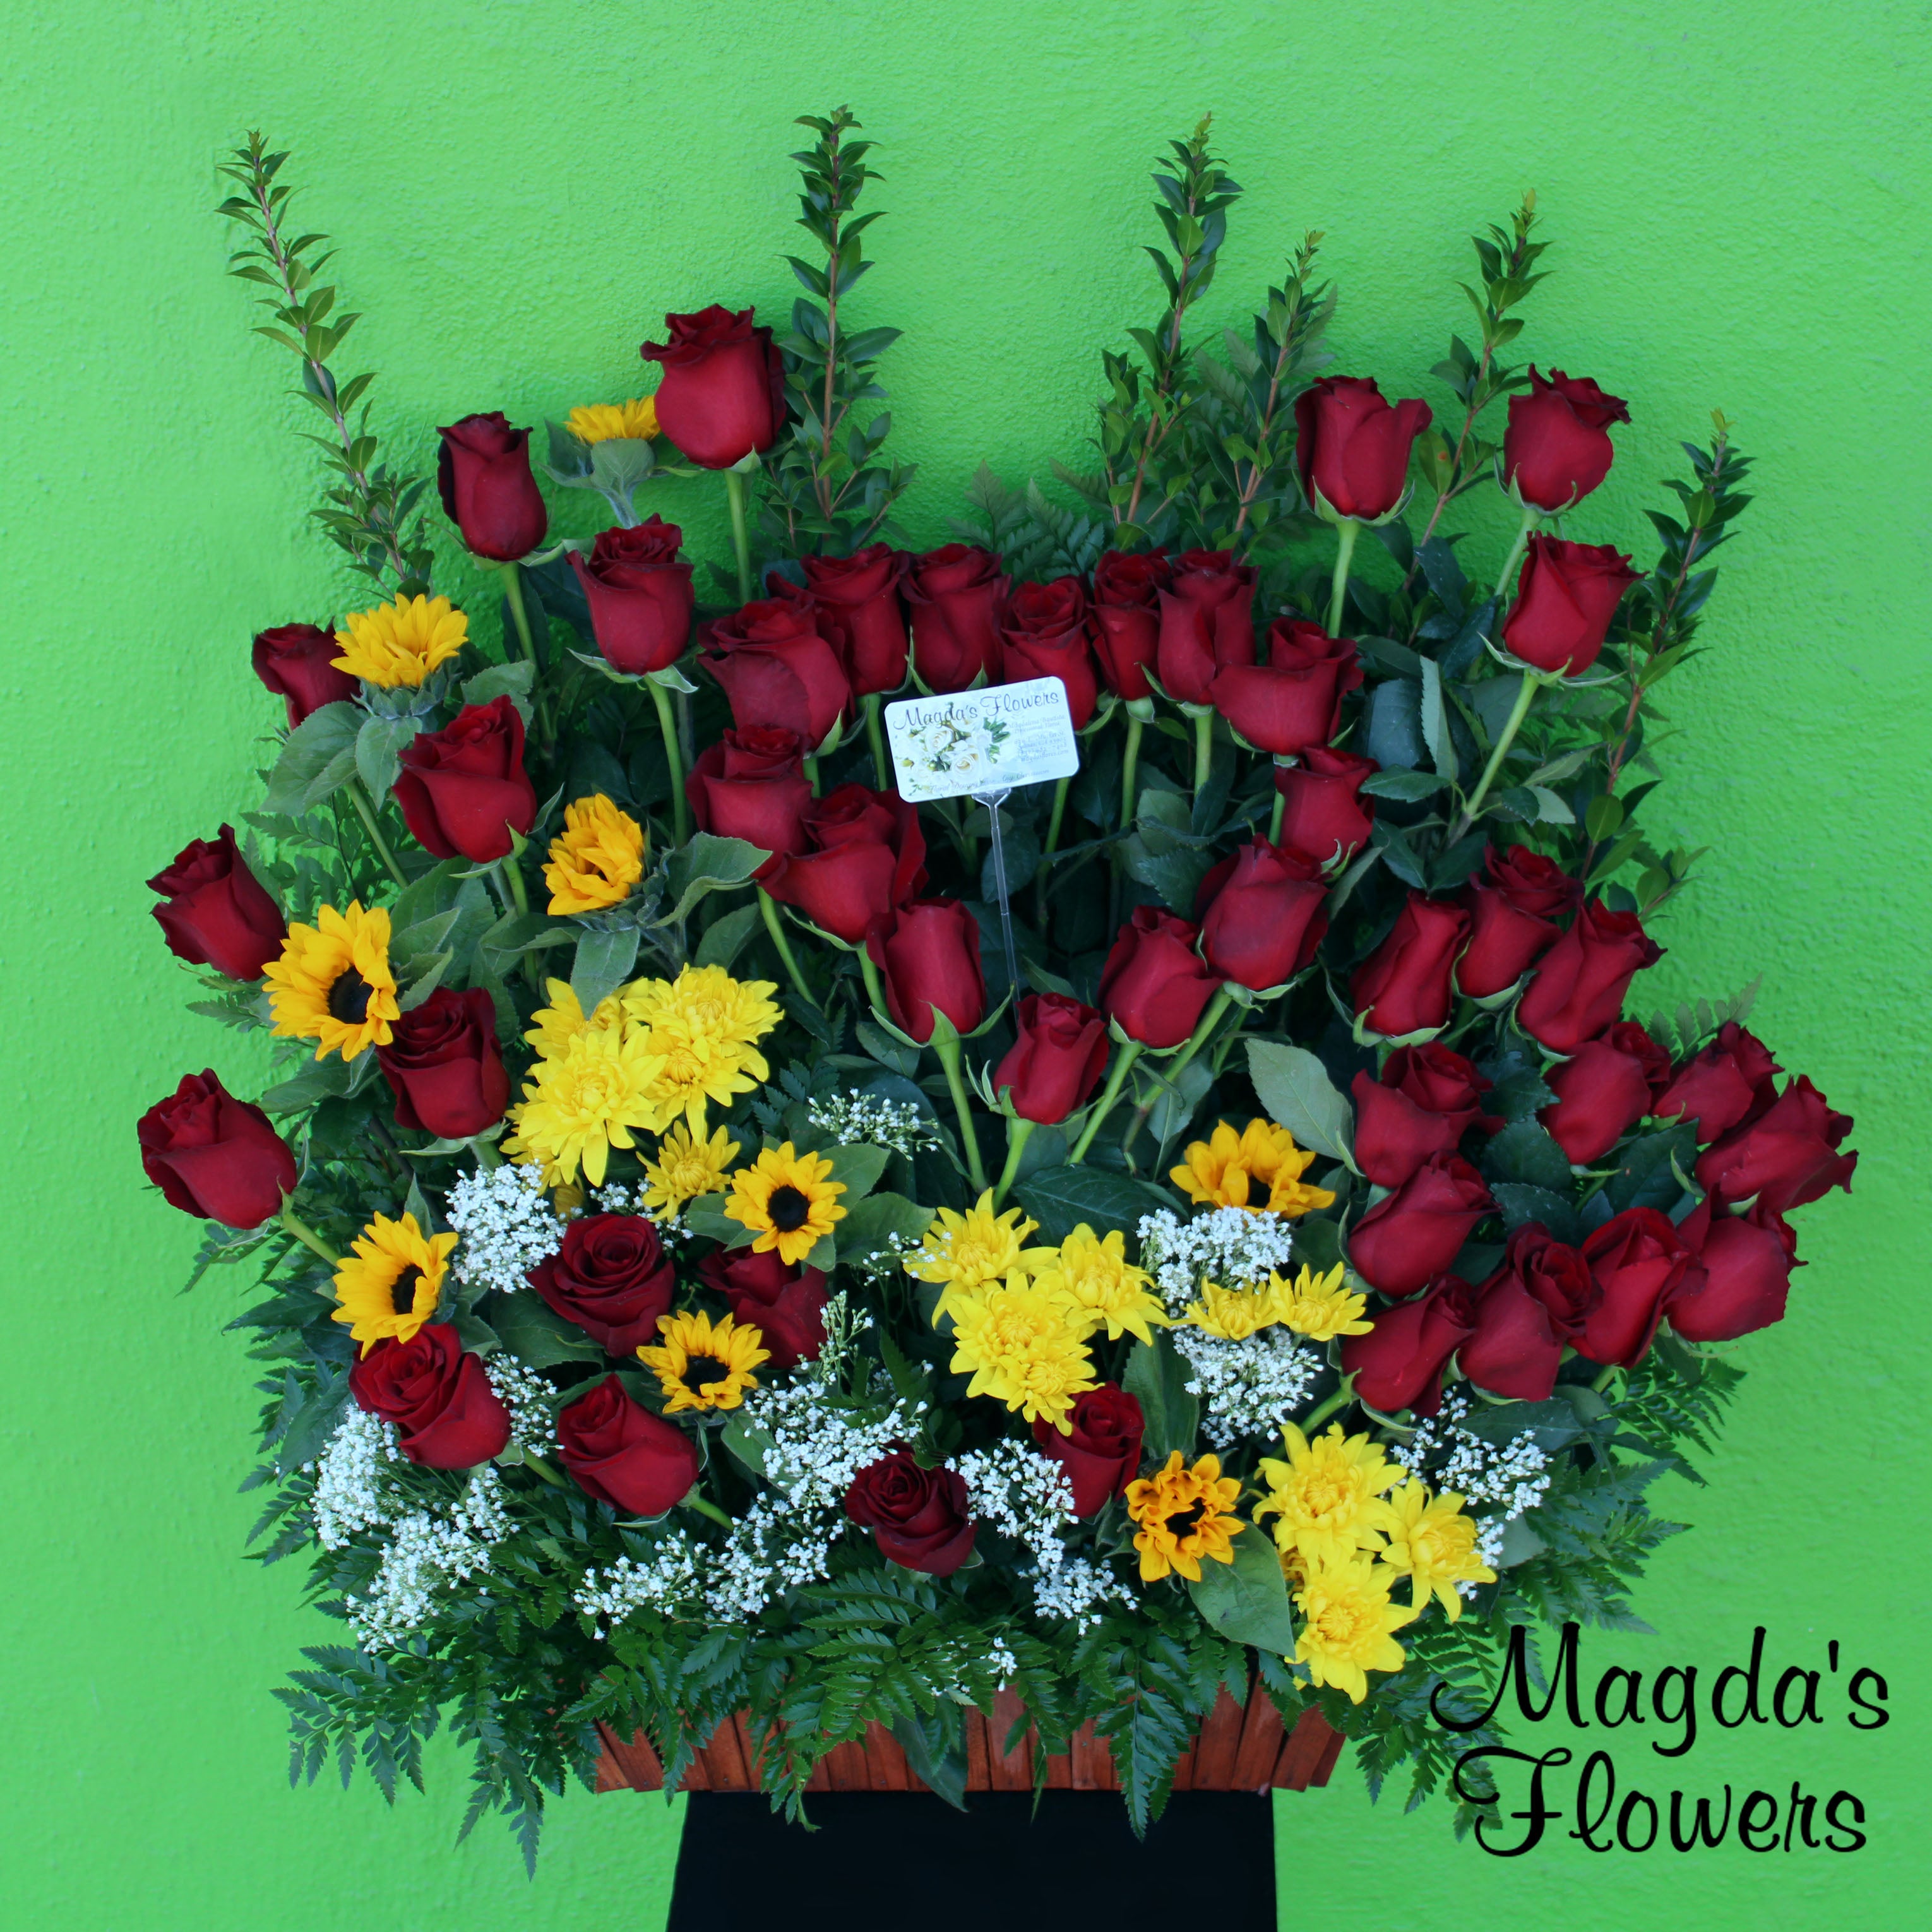 Loving Hearts - ﻿﻿This heartwarming floral basket is the perfect way to express your love and affection towards your heart's companion. It features two heart-shaped arrangements of red roses, surrounded by carnation, sunflowers, myrtle stems and even more red roses. The greenery adds a touch of freshness to this elegant basket that is ideal for expressing your love on Valentine's Day, Anniversaries, or any special occasion that calls for a touch of romance. 